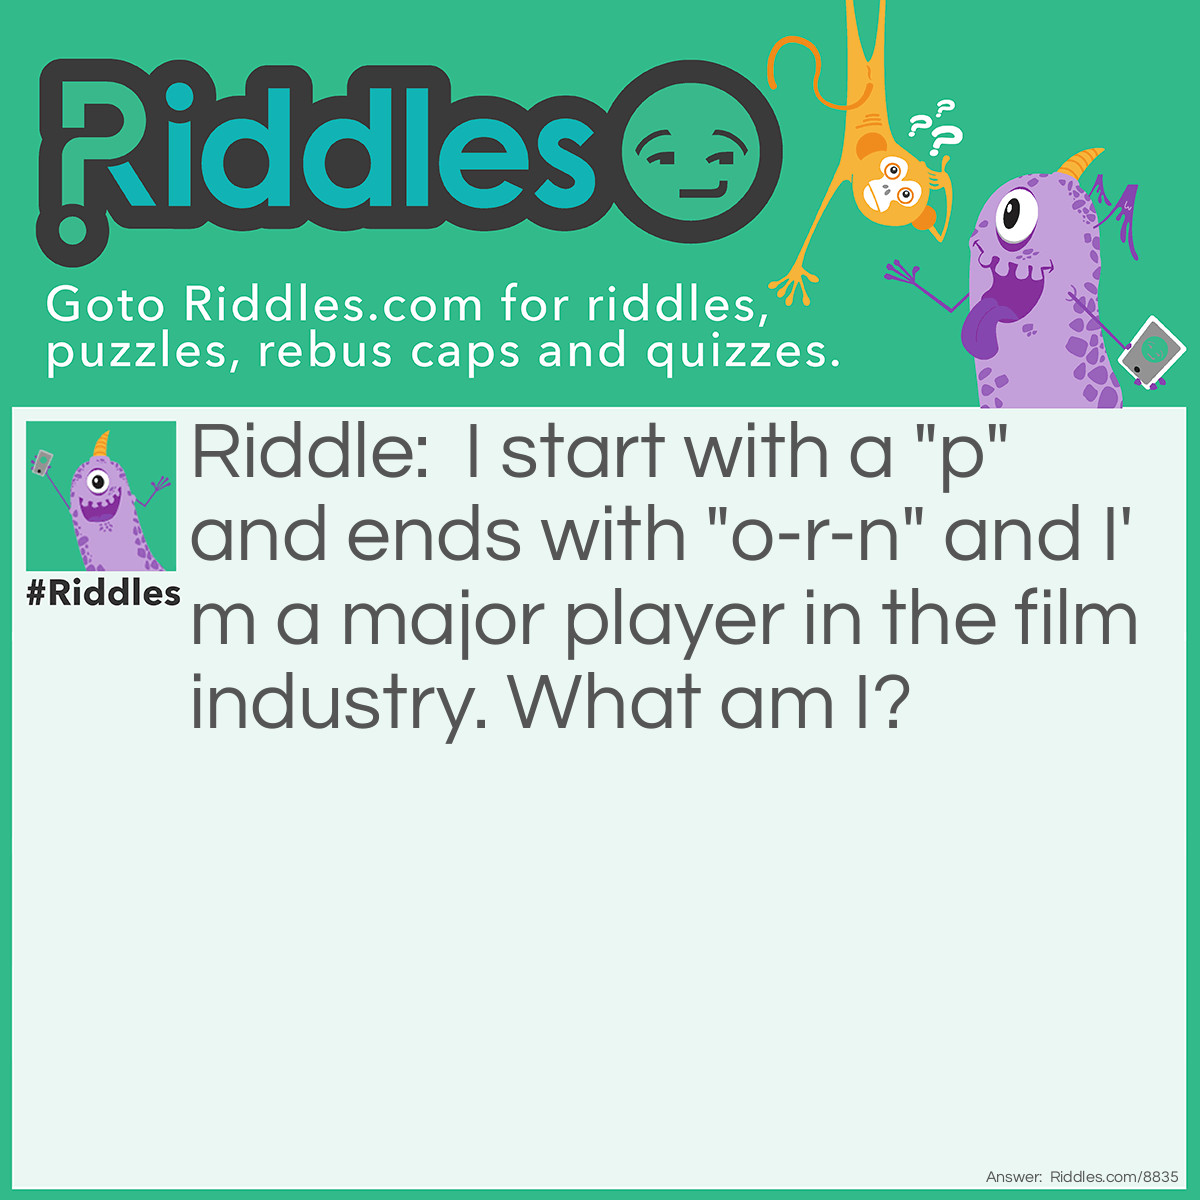 Riddle: I start with a "p" and ends with "o-r-n" and I'm a major player in the film industry. What am I? Answer: Popcorn.